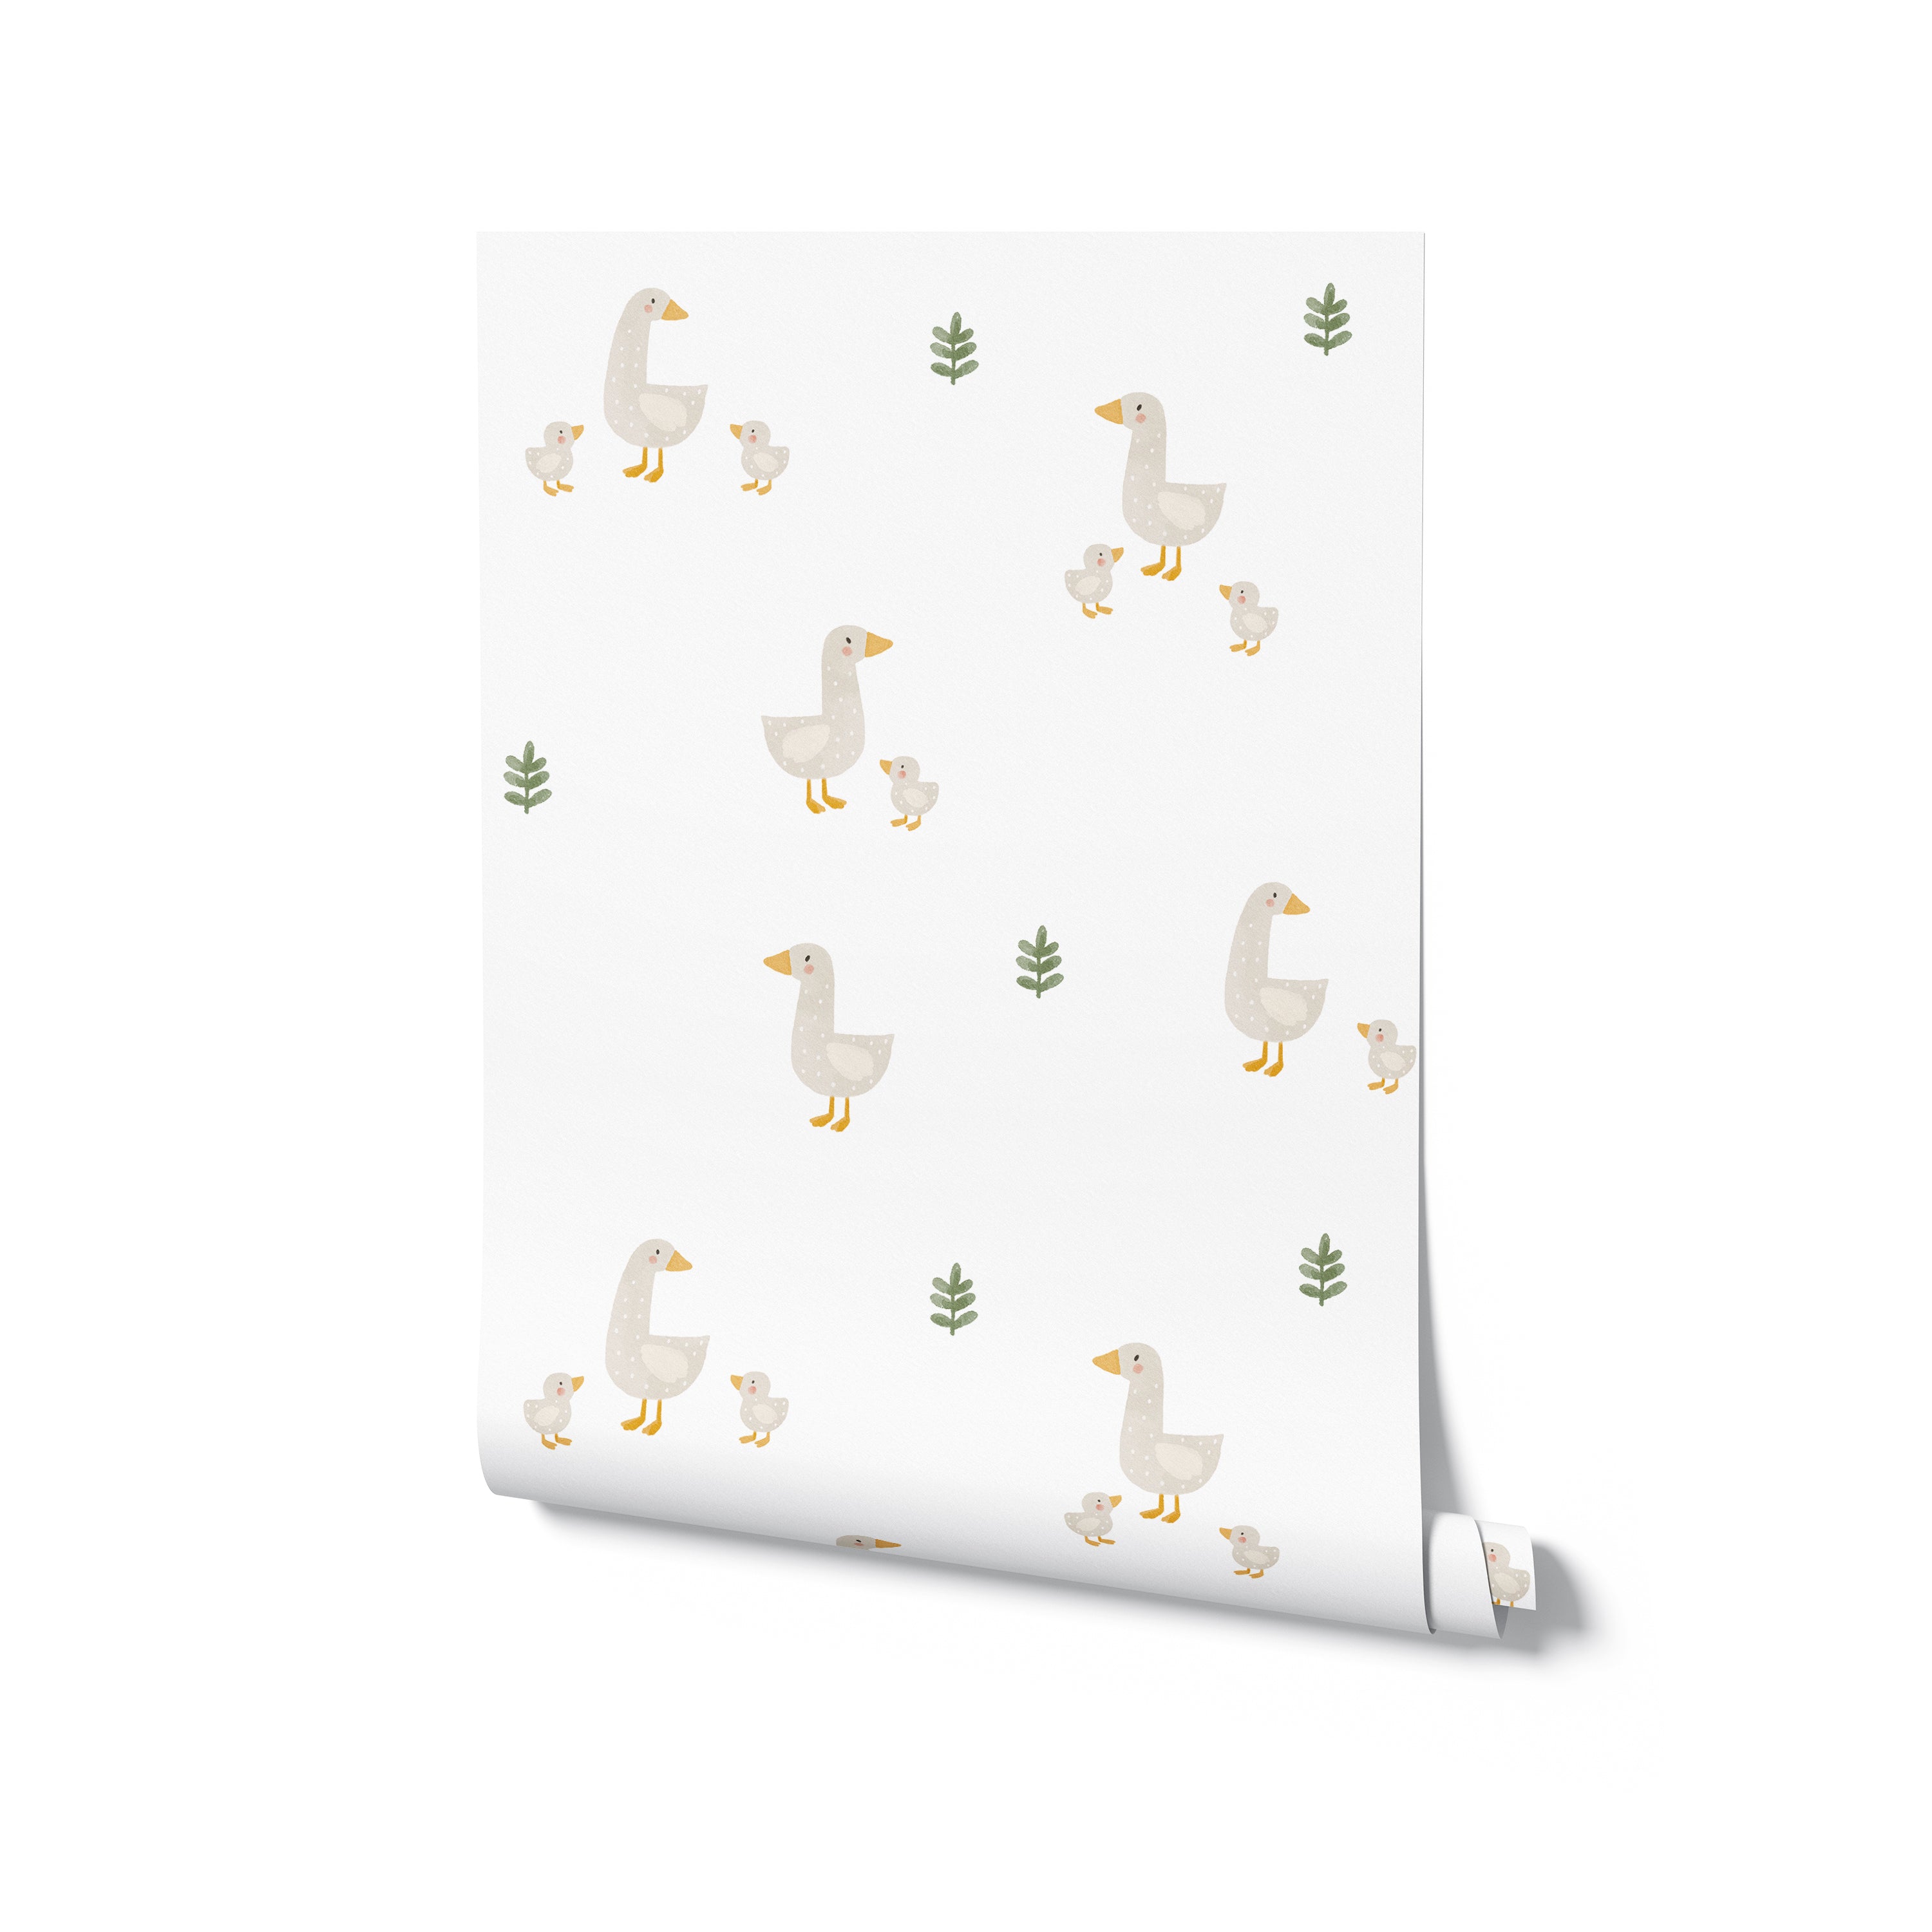 A rolled sample of the Cute Farm Friend Wallpaper, partially unrolled to reveal the friendly duck illustrations and tender green plants against the white background. This wallpaper is perfect for adding a touch of rural charm and lightheartedness to a child’s bedroom or play area.